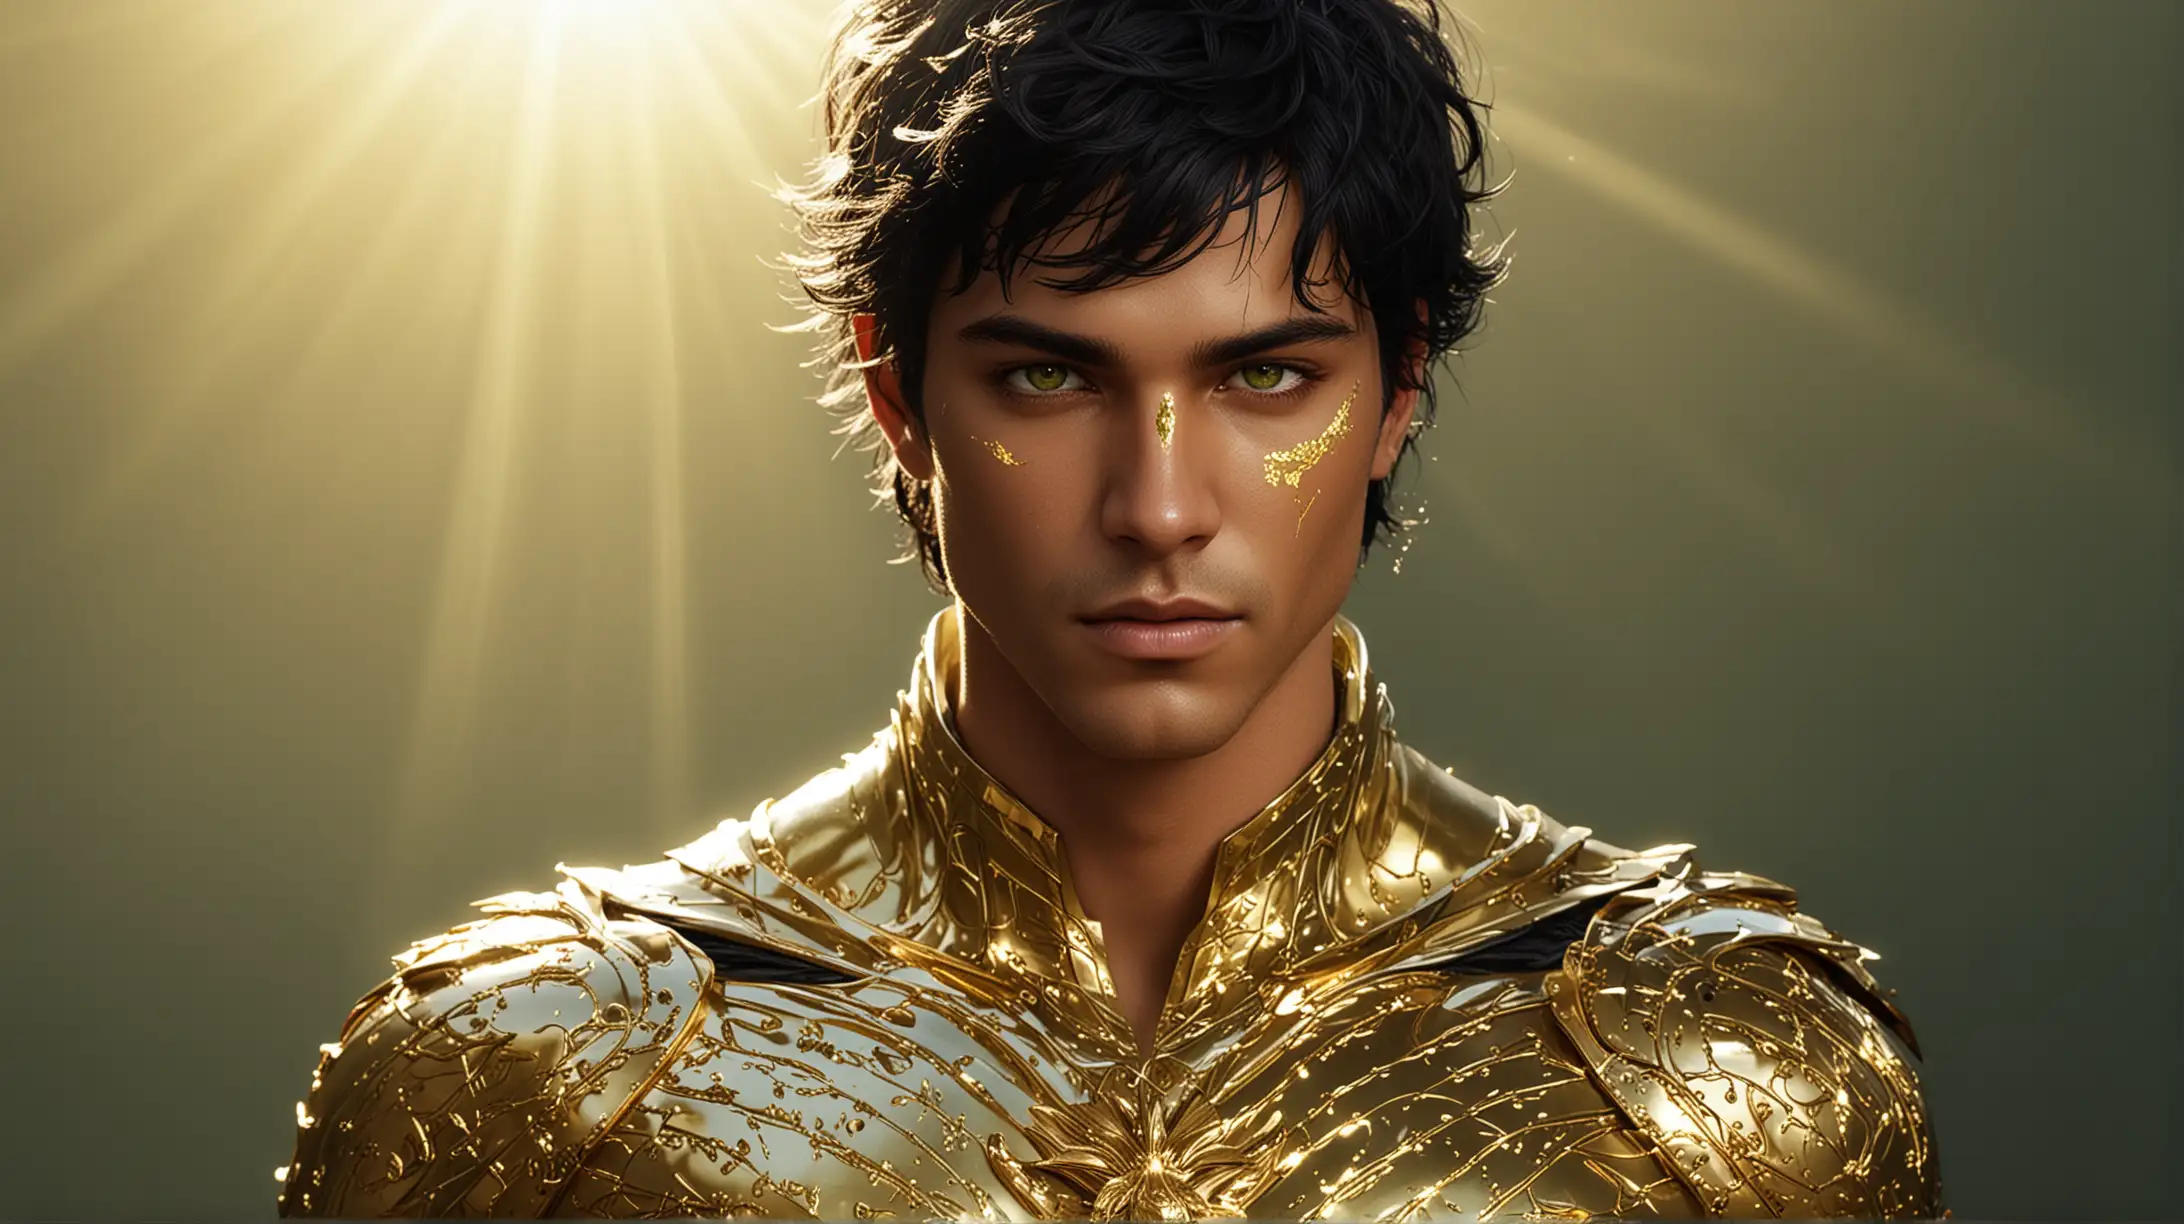 (gold skin:1.39), ((man) |  (with gold tan, Black hair, green eyes  | [armour] | (Completely gold skin) solar rays